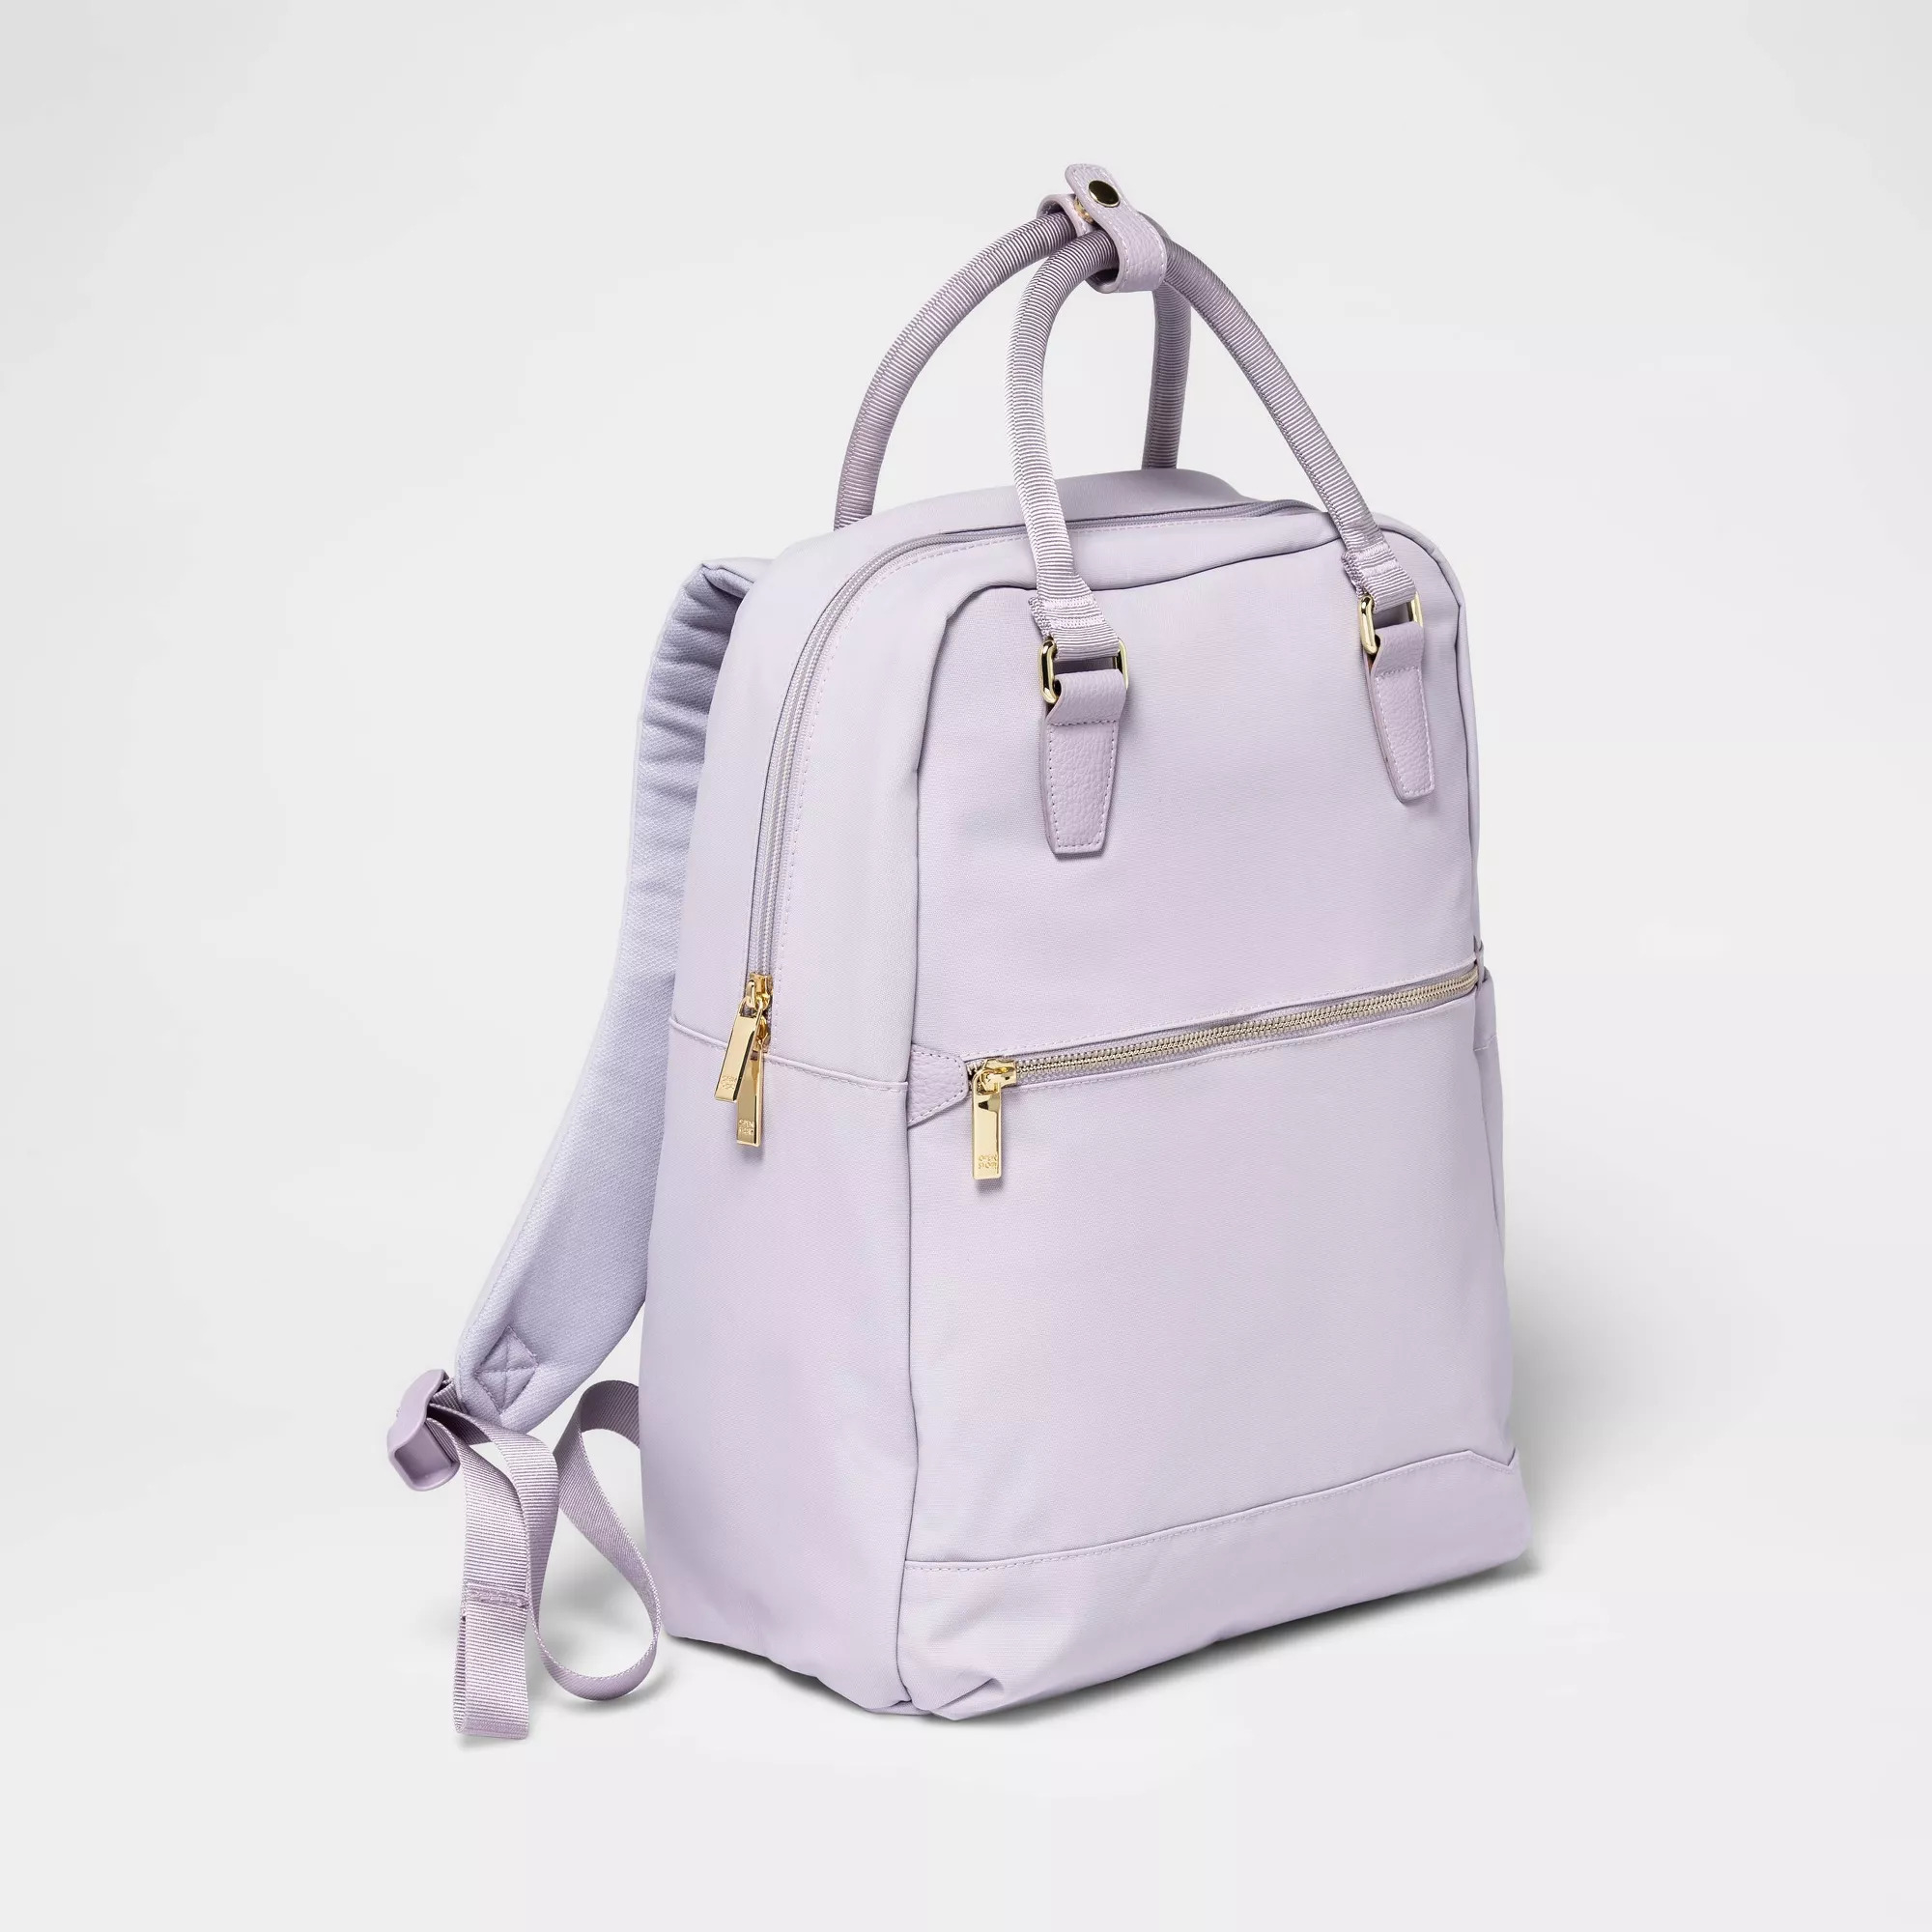 The backpack with gold hardware, with a zippered compartment in the front